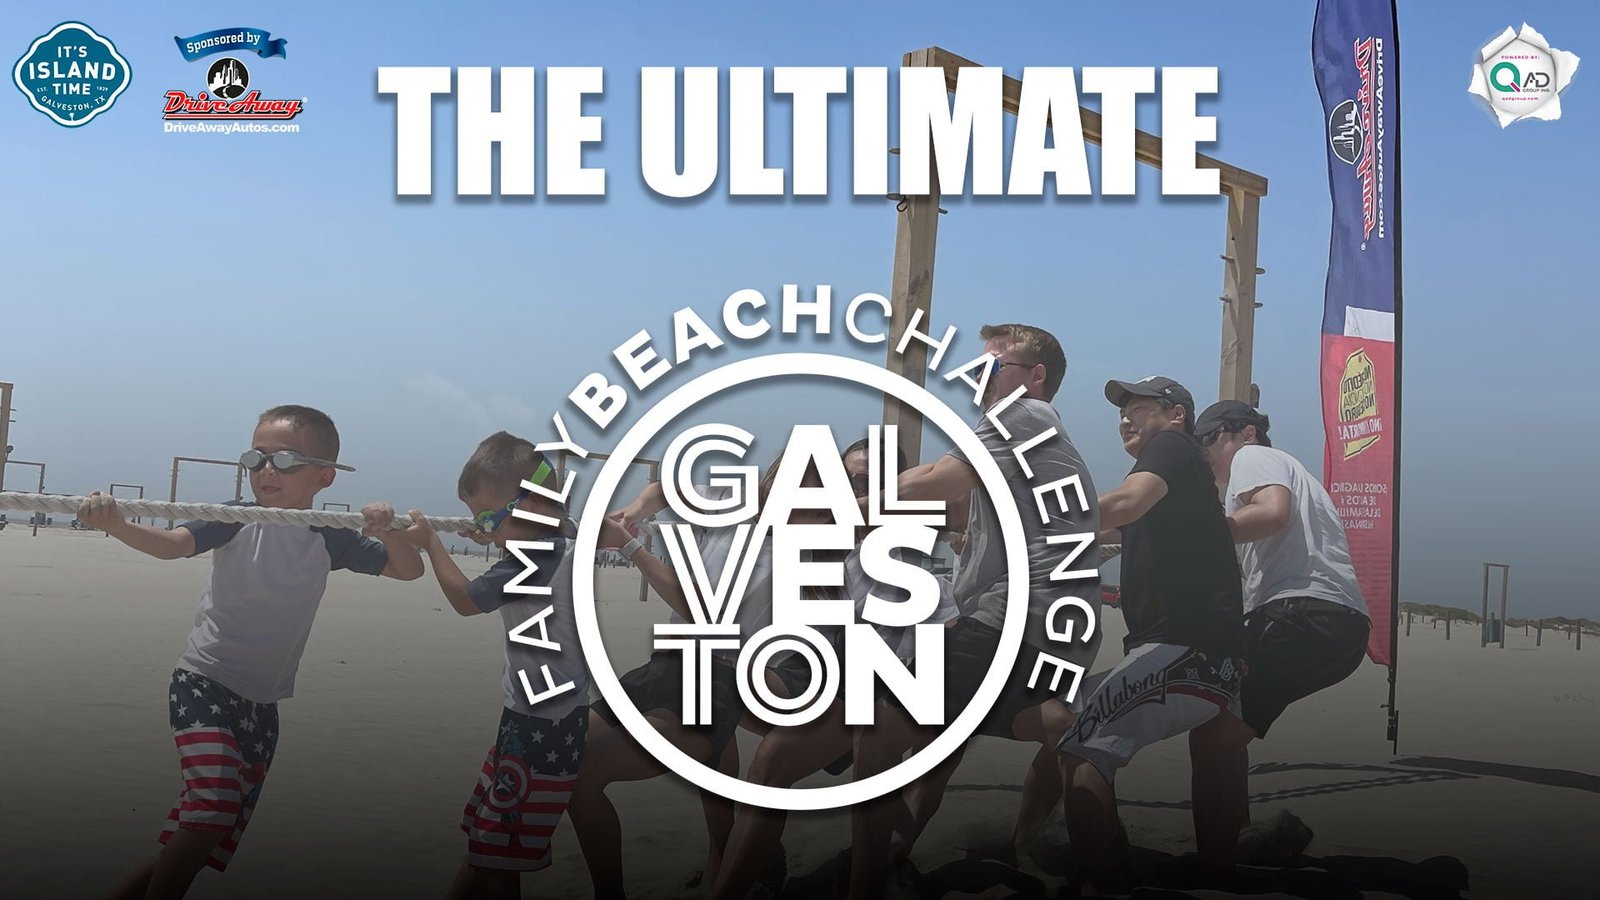 The Ultimate Galveston Challenge is coming!